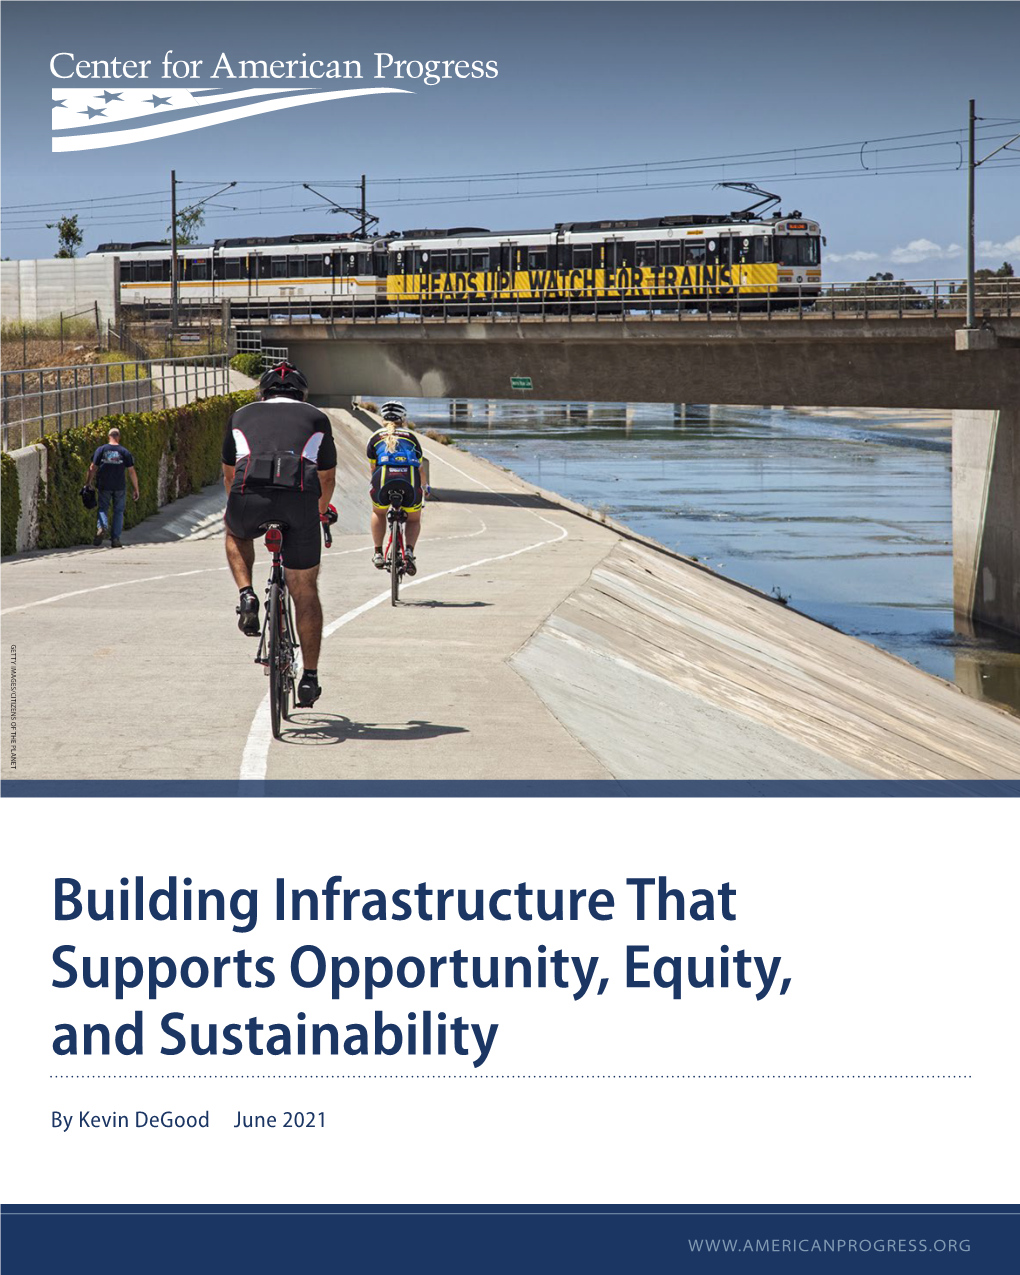 Building Infrastructure That Supports Opportunity, Equity, and Sustainability